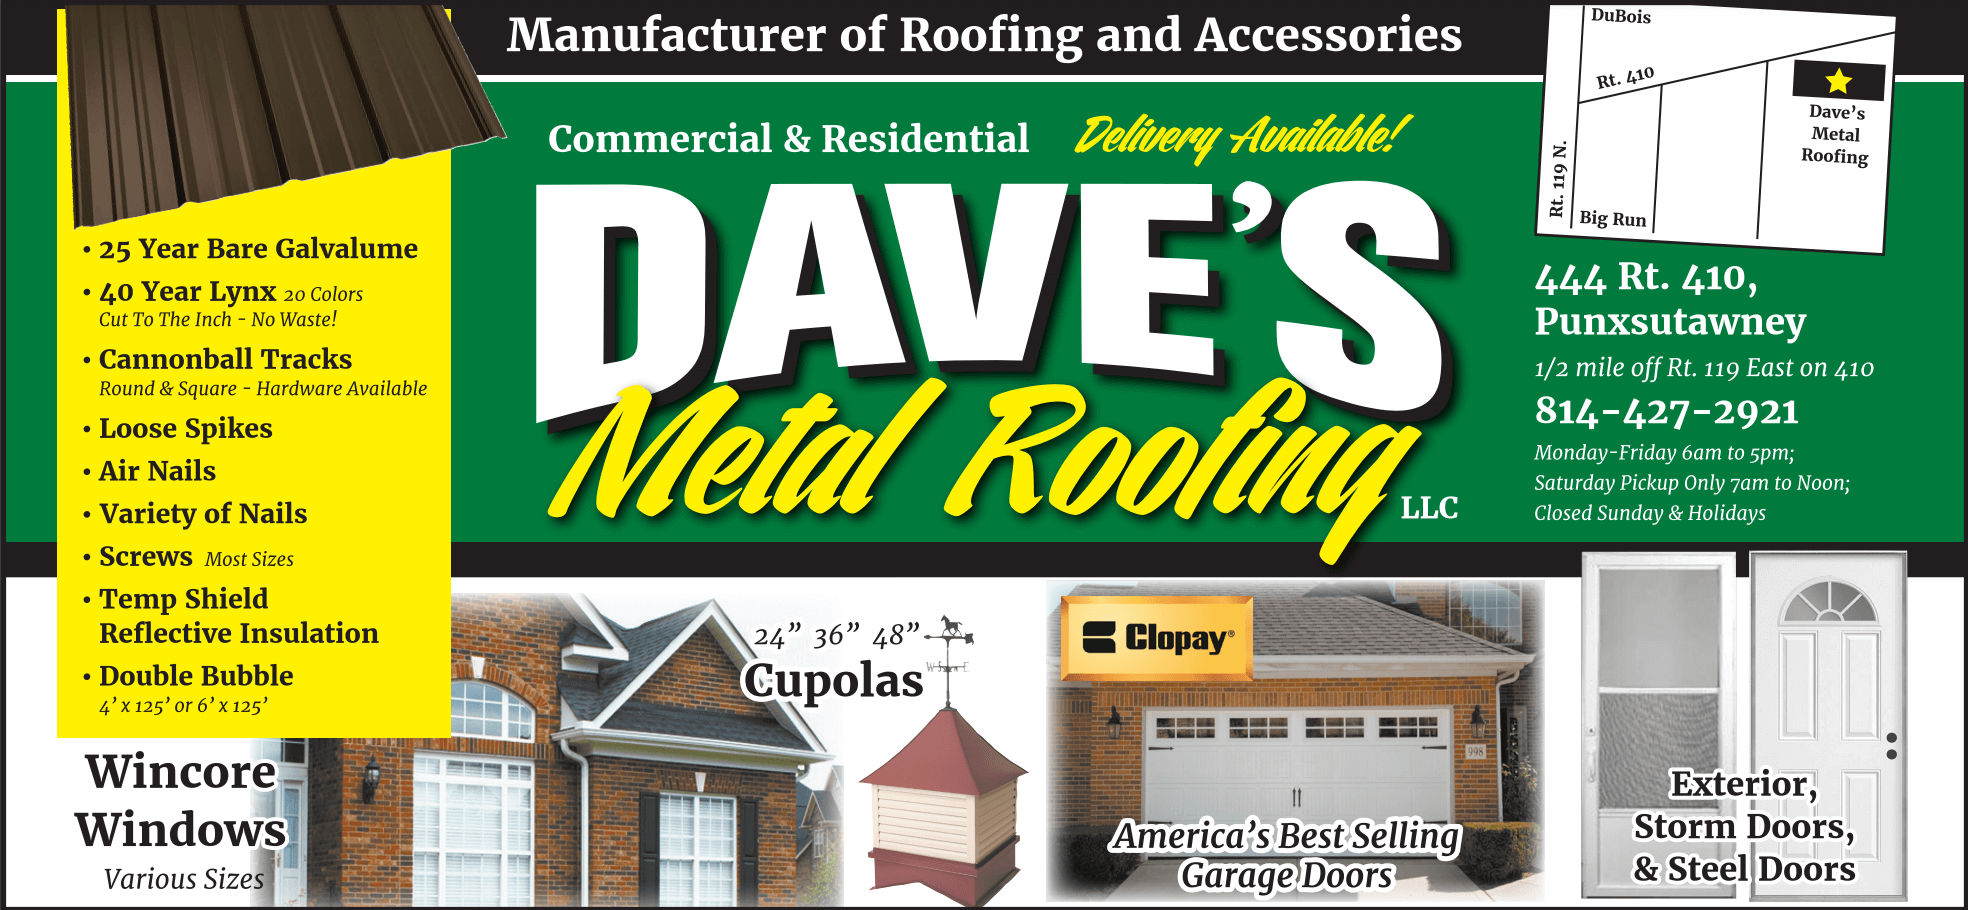 Dave’s Metal Roofing – Durable and Stylish Roofing Solutions